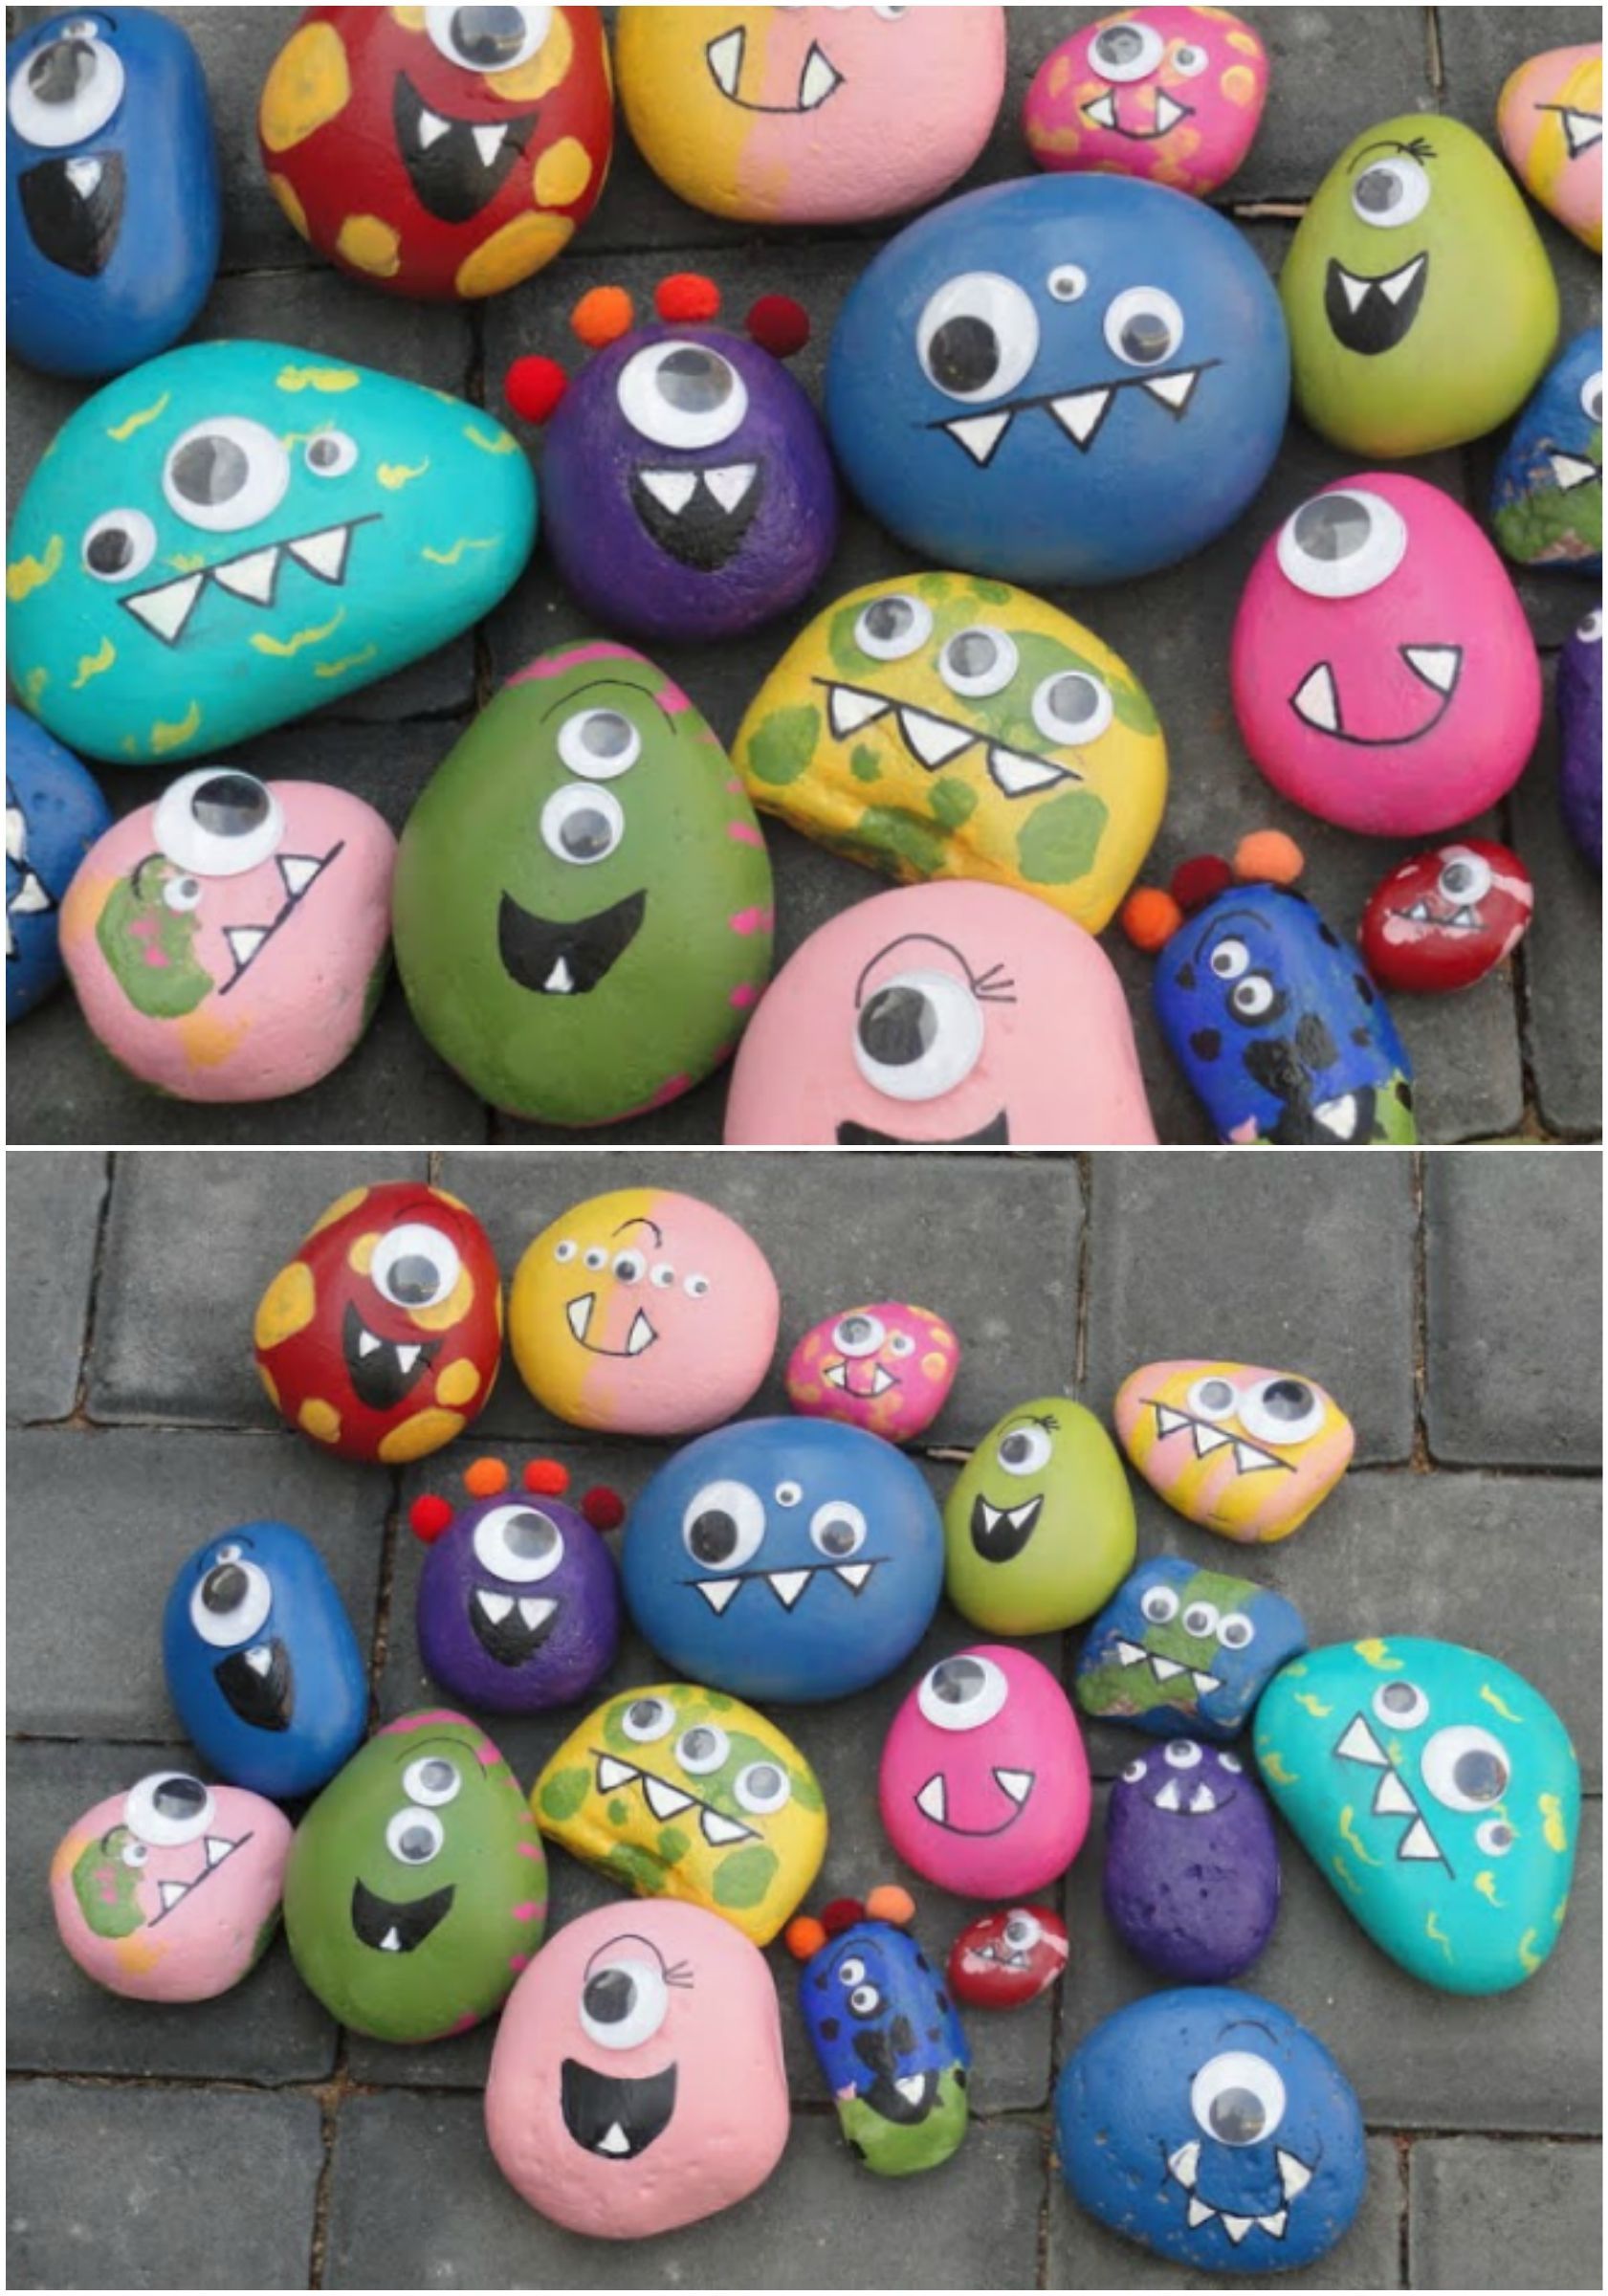 These happy monster rocks would brighten up any garden! Cute DIY project to get Dennis smiling (and keep him busy…) on a rainy day. -   25 diy rock garden
 ideas